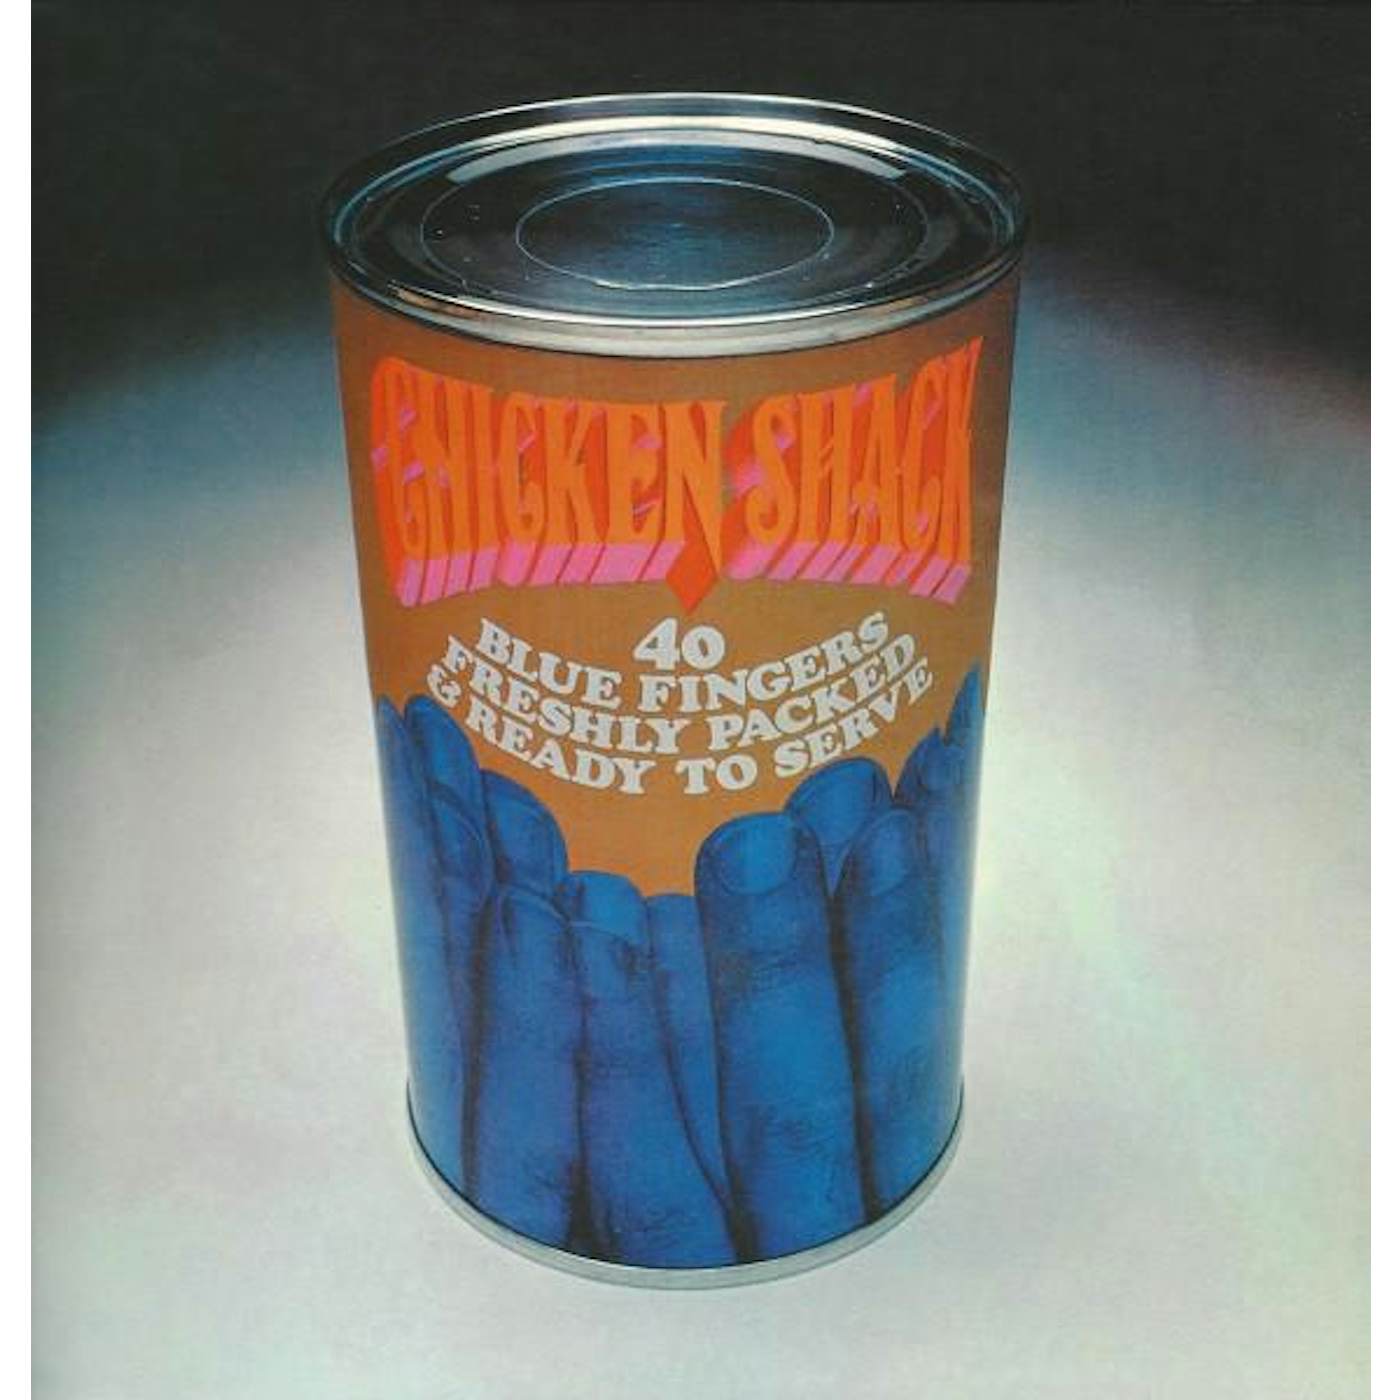 Chicken Shack 40 BLUE FINGERS FRESHLY PACKED & READY TO SERVE (180G) Vinyl Record